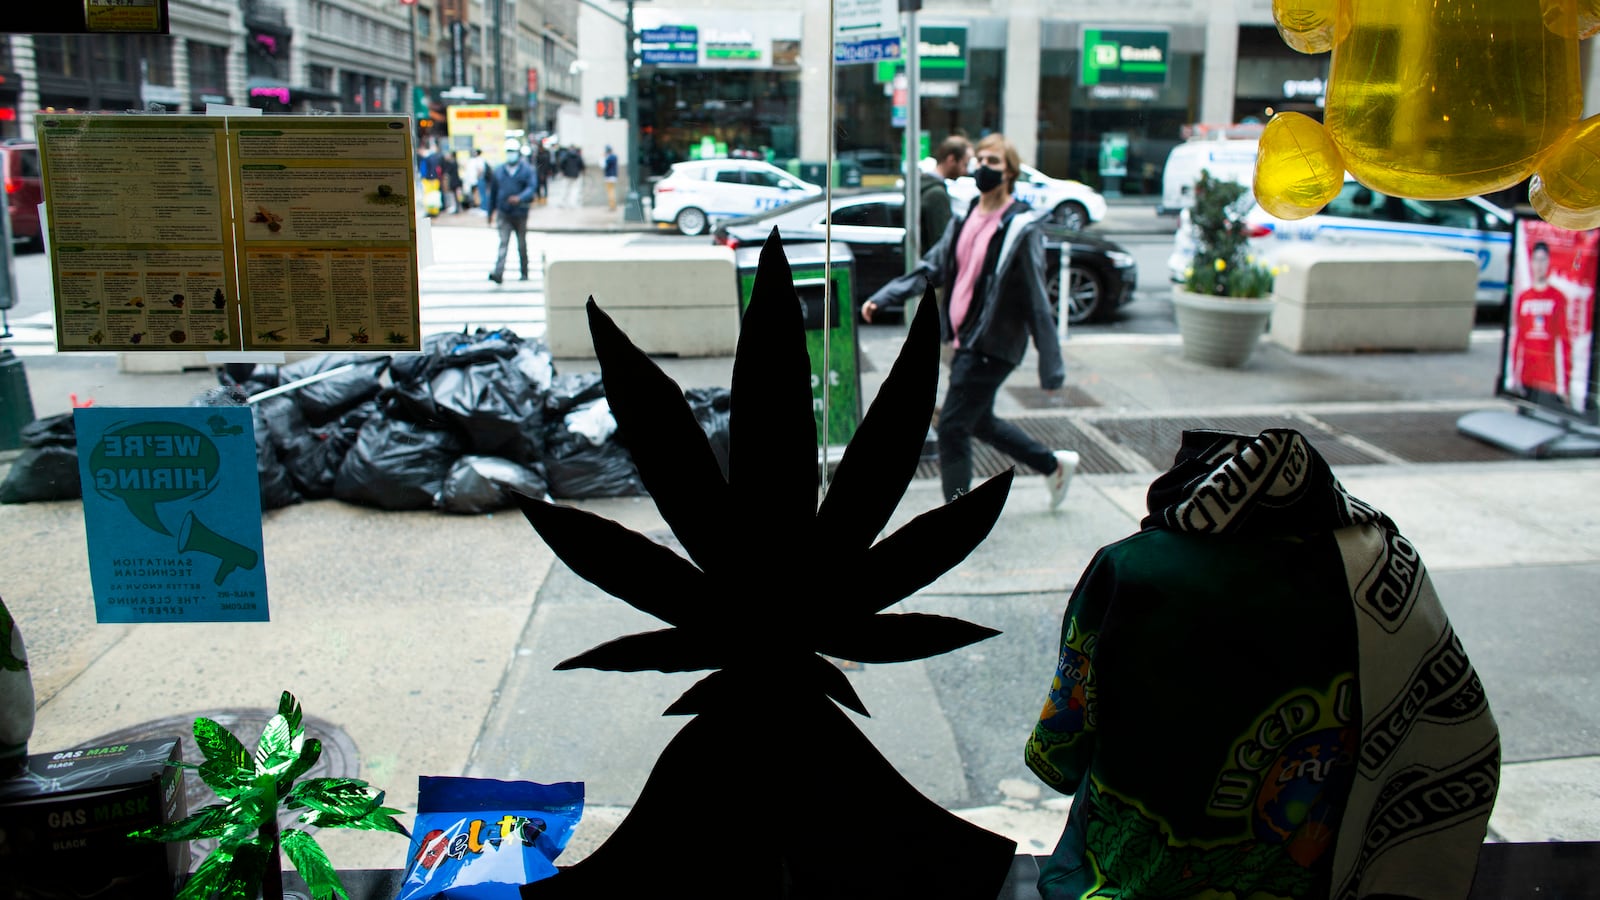 A marijuana plant is dark in the foreground in a store window while in the background people walk on the sidewalk outside.